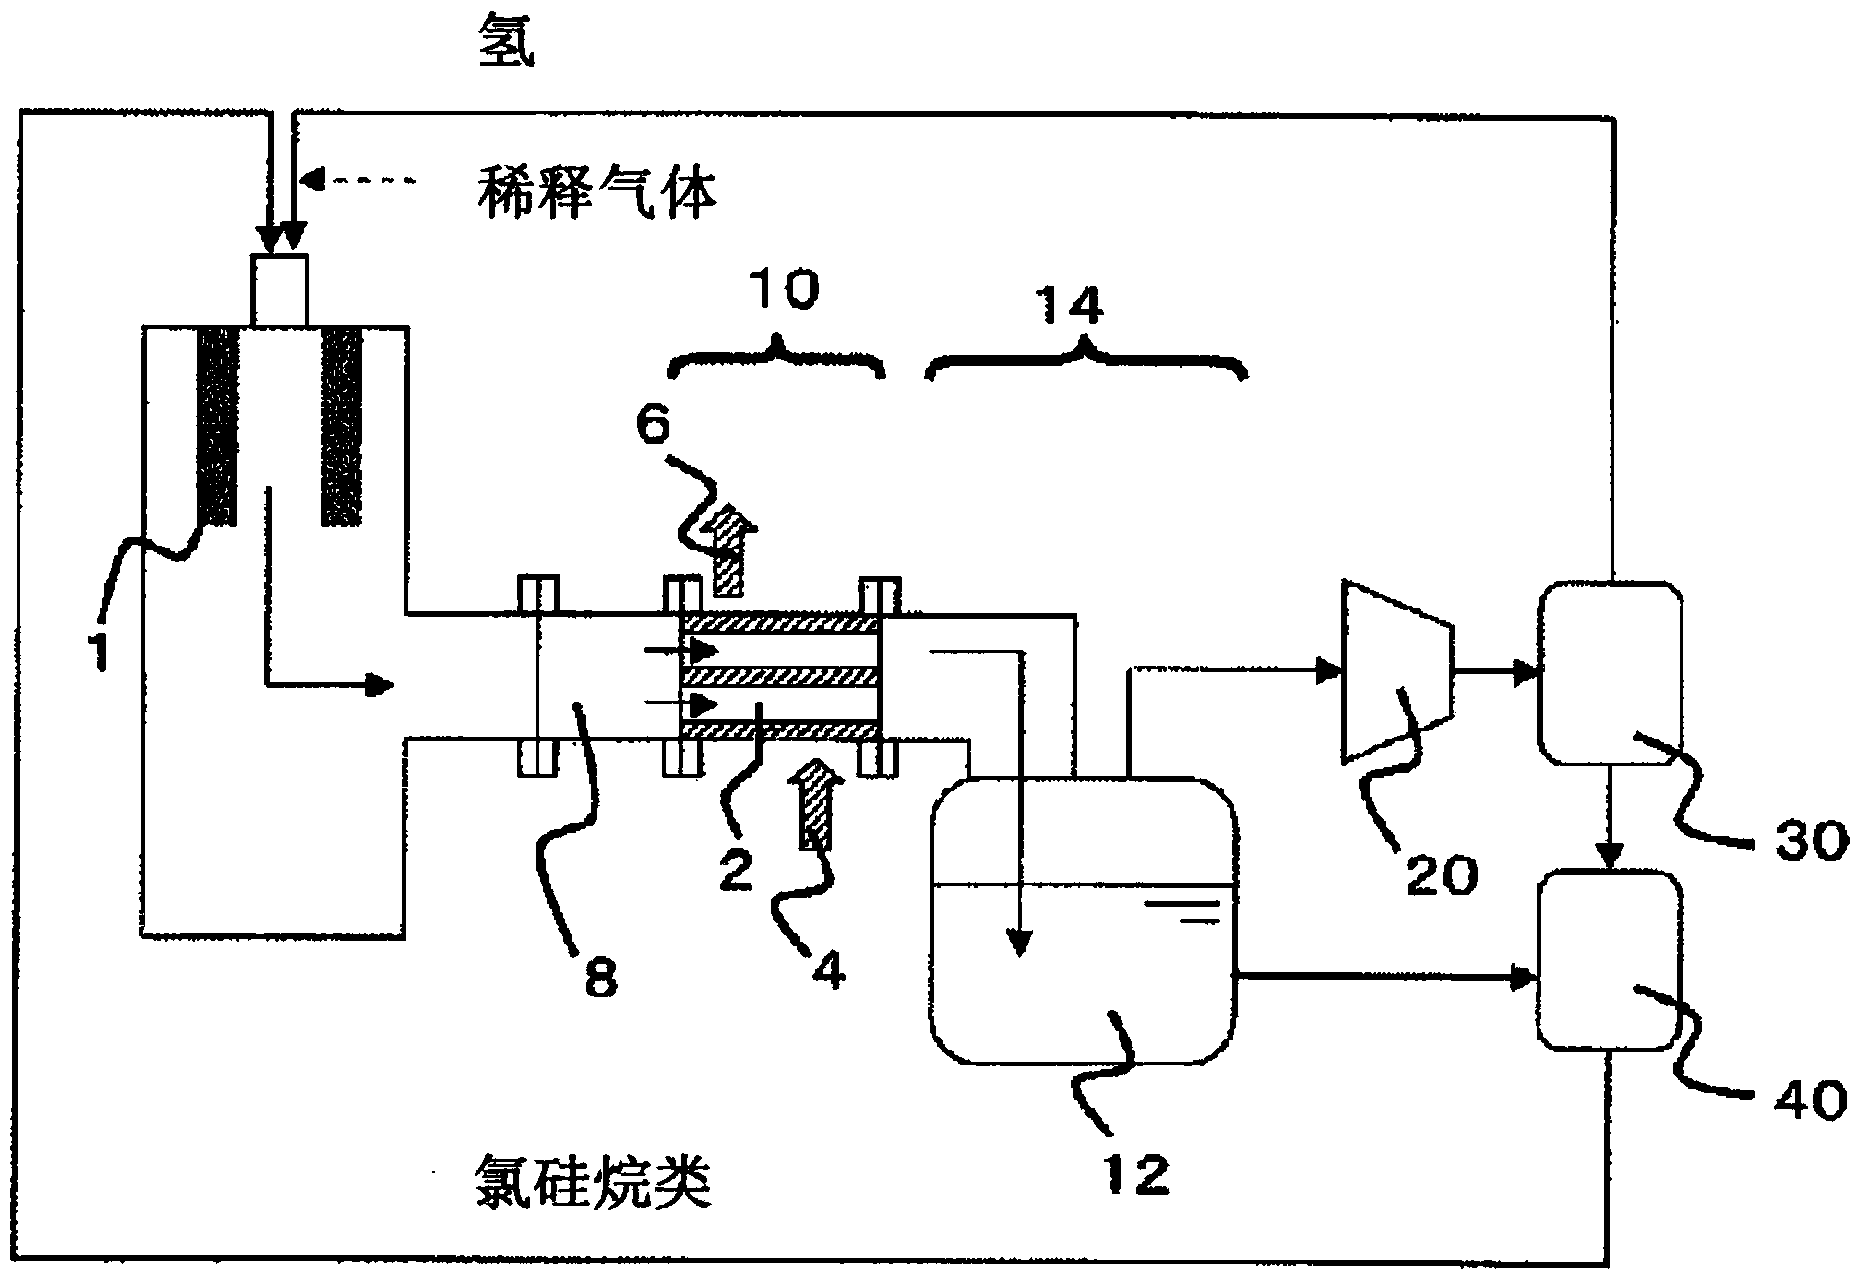 Method for producing polysilicon